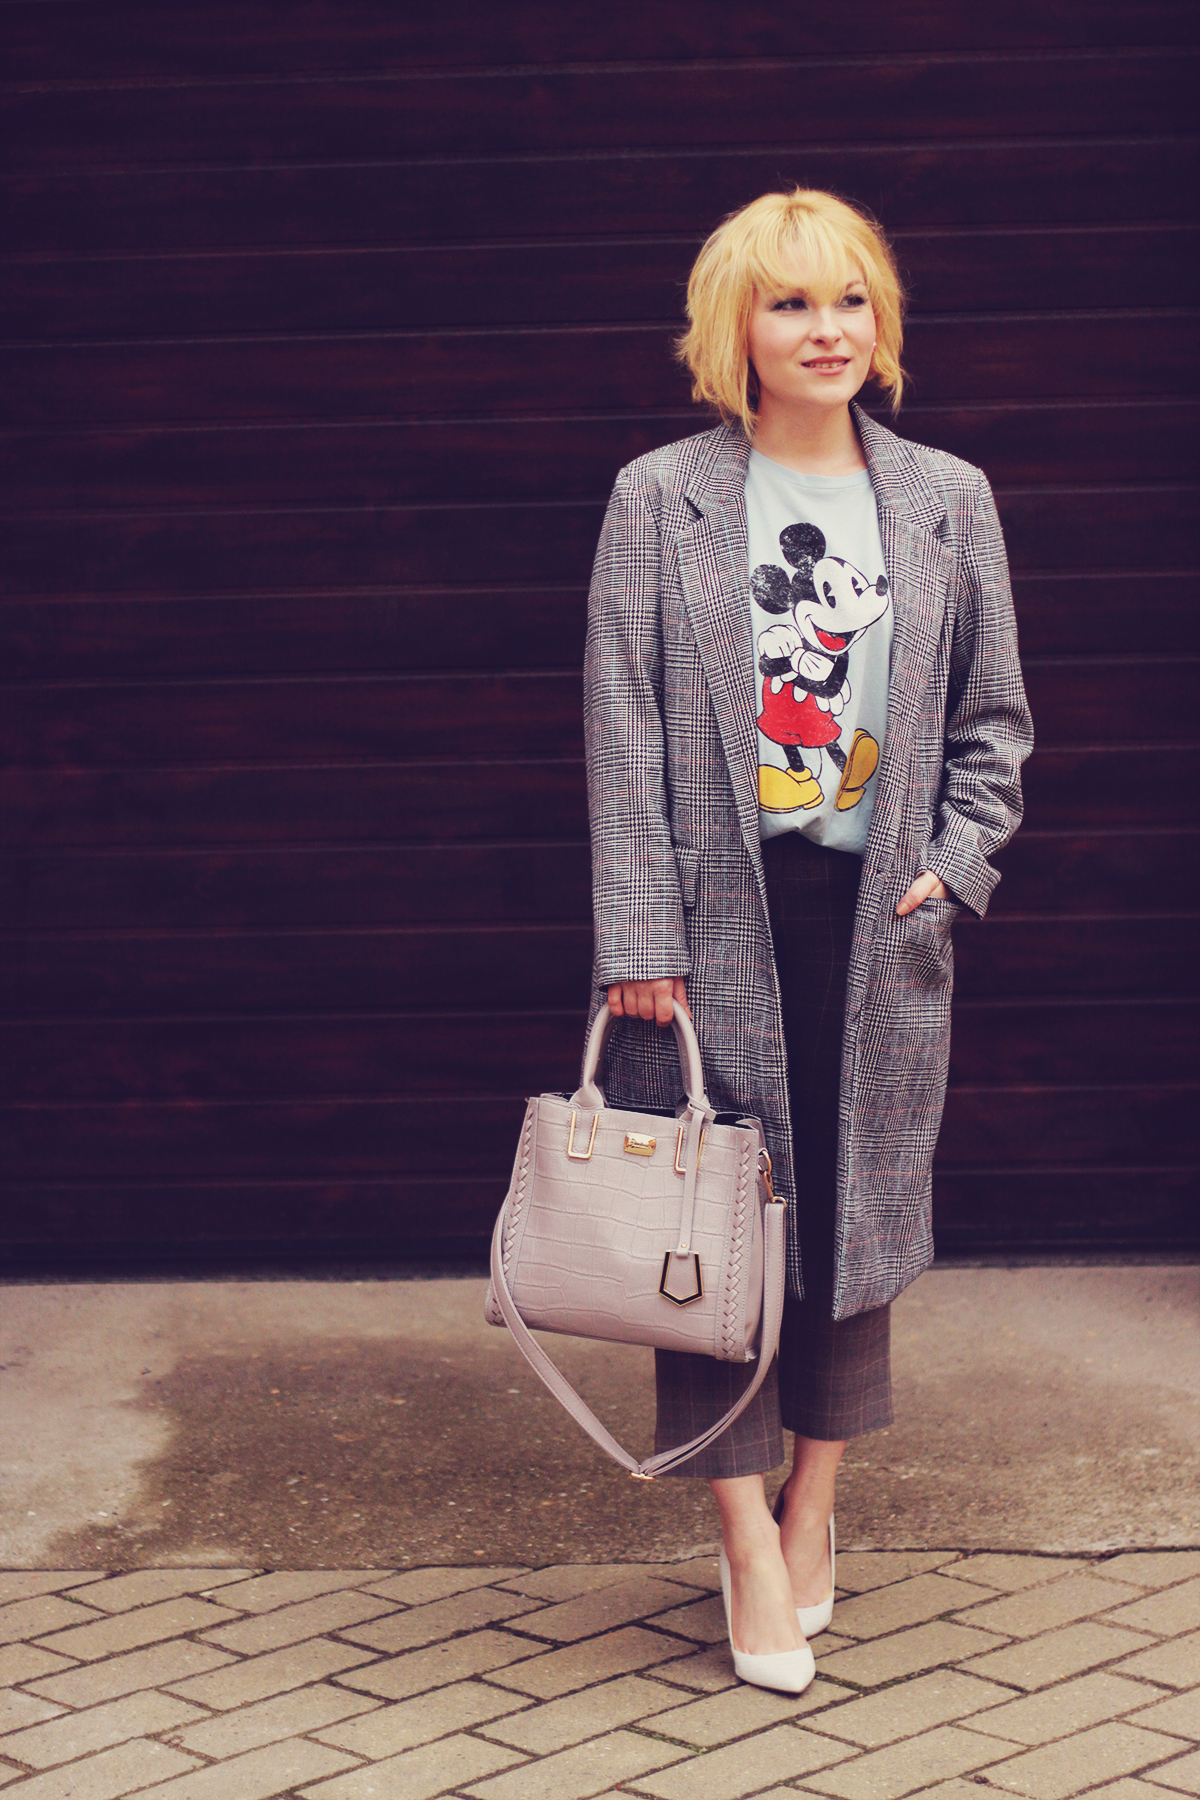 Mickey Mouse t-shirt, gingham coat and pants, white heels, tote bag, office look, work outfit inspiration